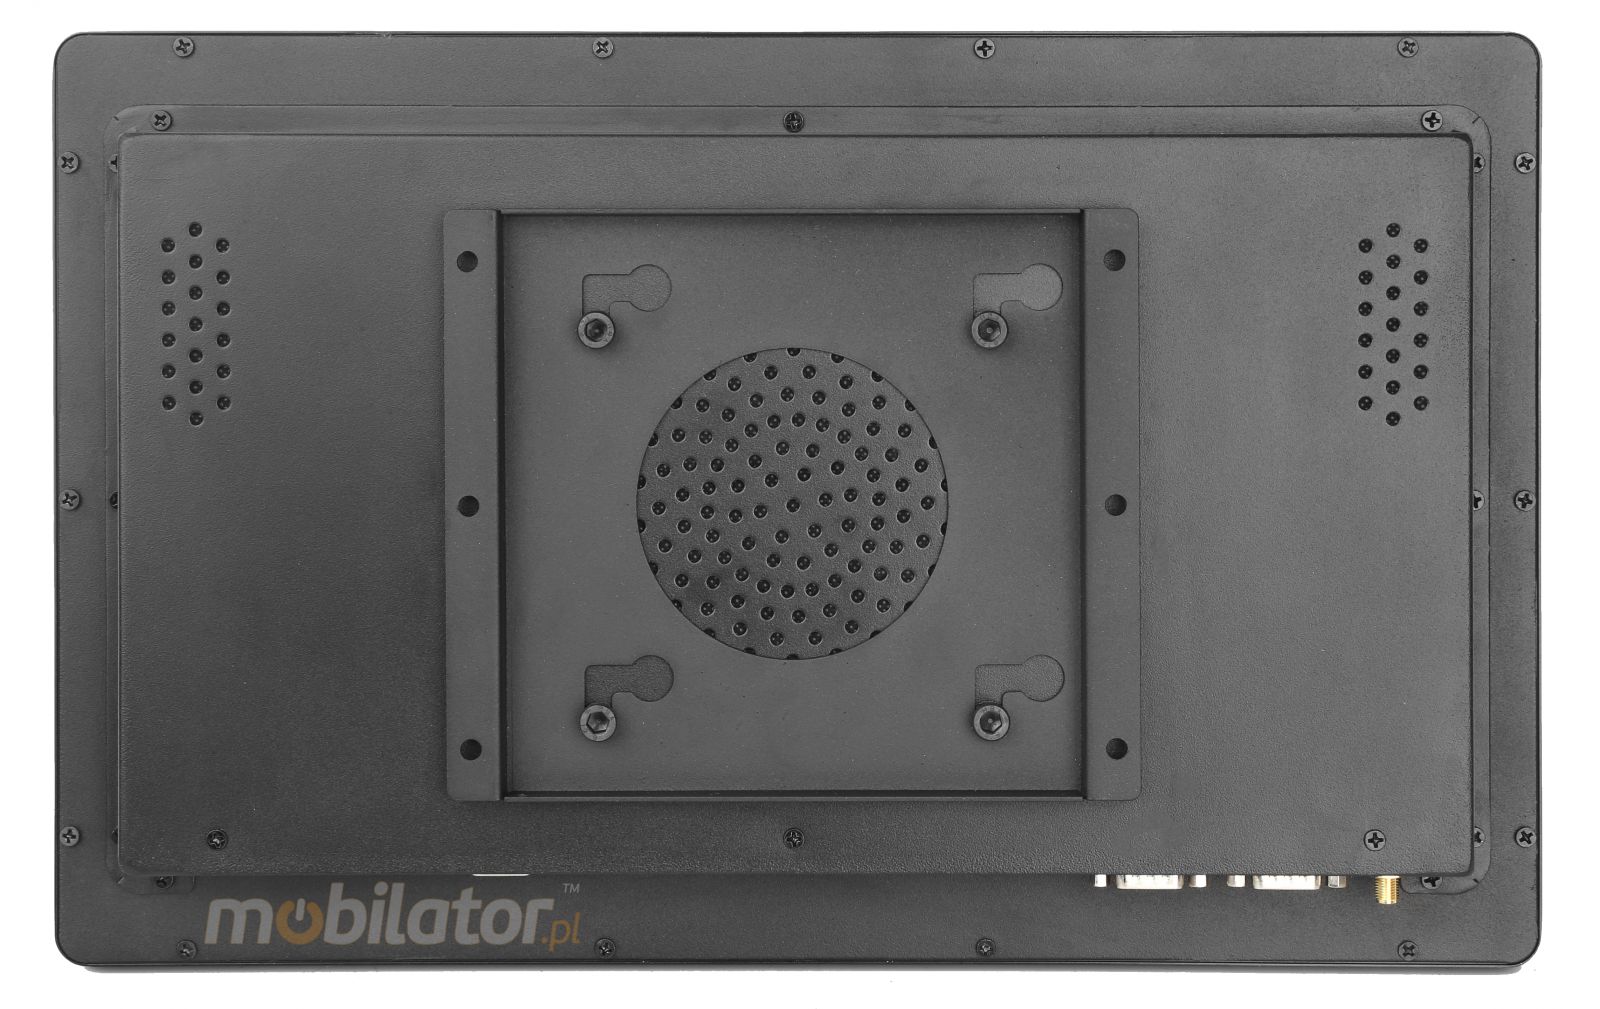 BiBOX-185PC1 (i5-4200U) v.2 - Armored waterproof industrial panel with IP65 and WiFi resistance standard